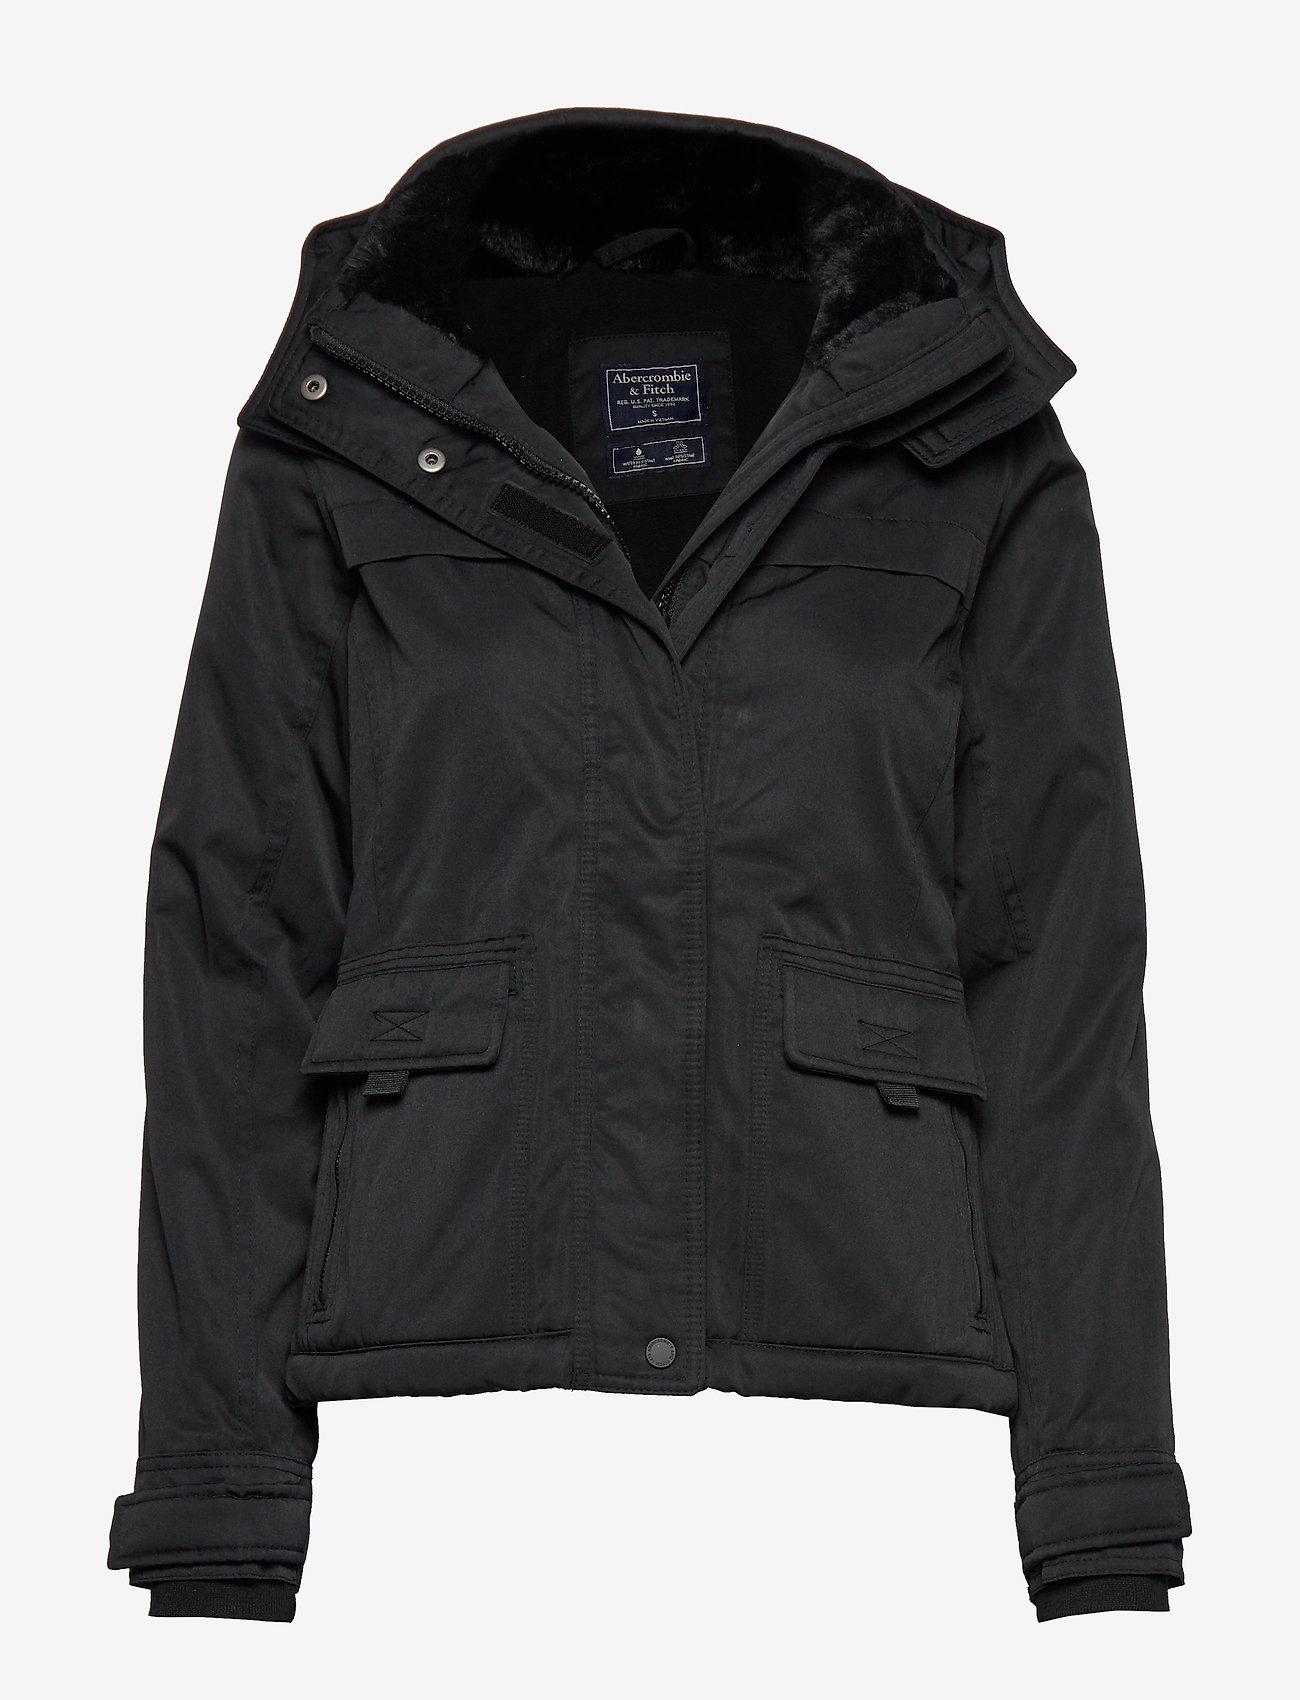 abercrombie & fitch jacket